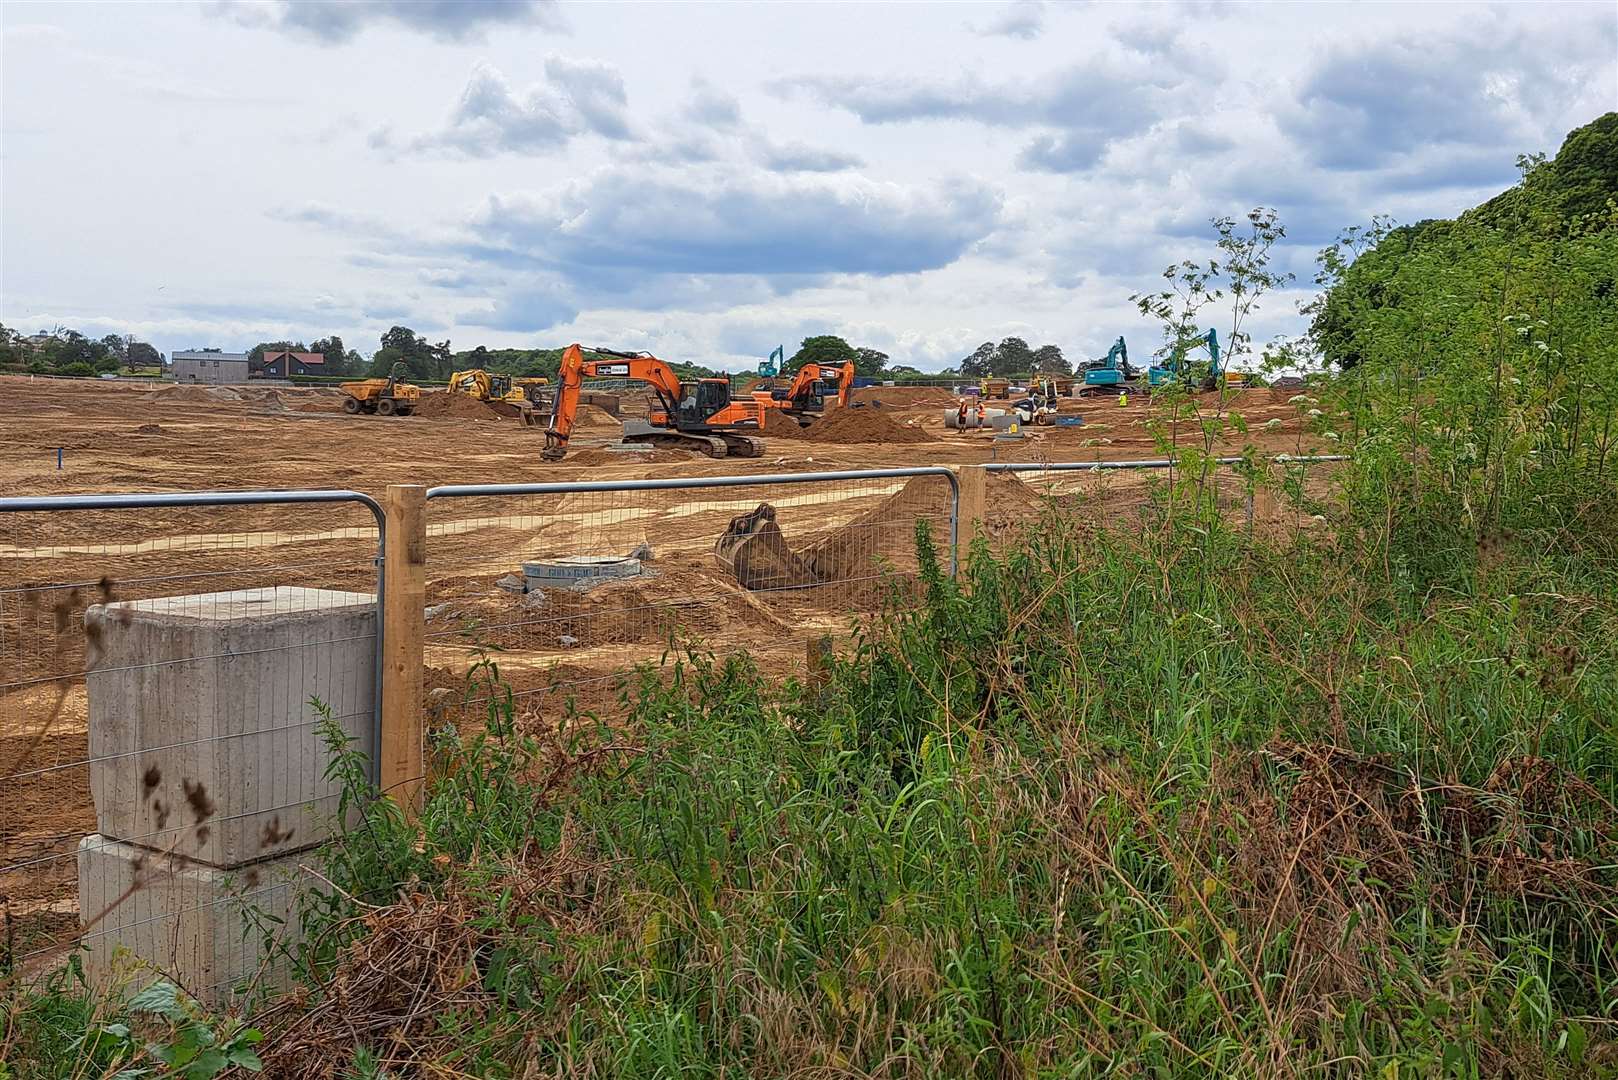 Construction is under way at Forty Acres Field in East Malling